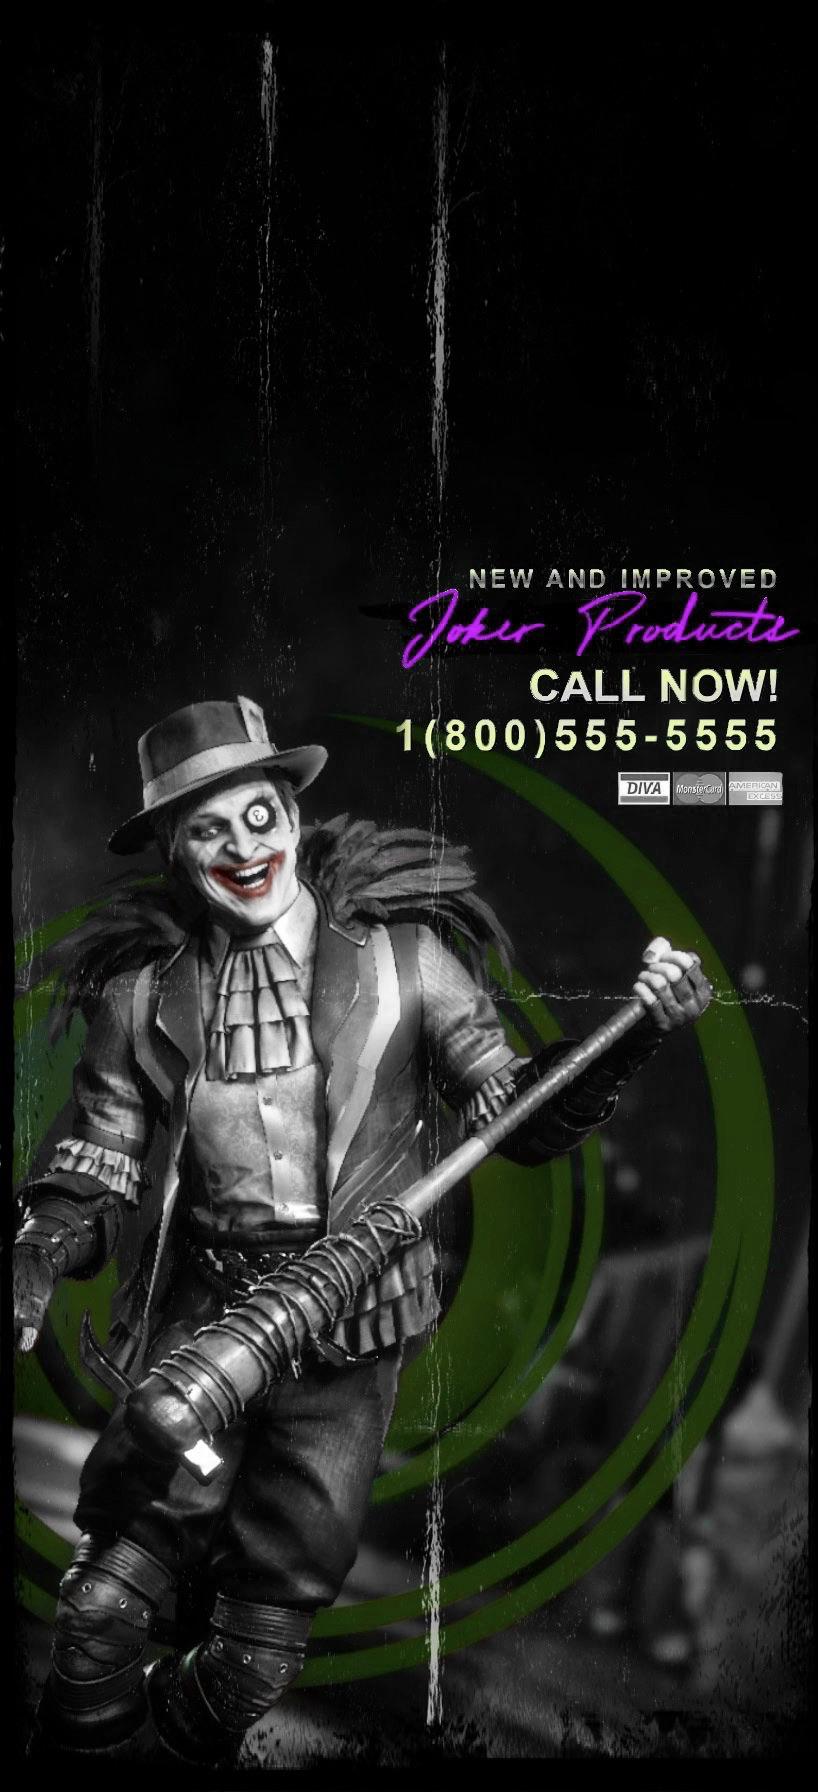 Joker Products “Ad” Wallpaper I Threw Together. Hope Someone Likes It! (Sized For IPhοne 11 XR)